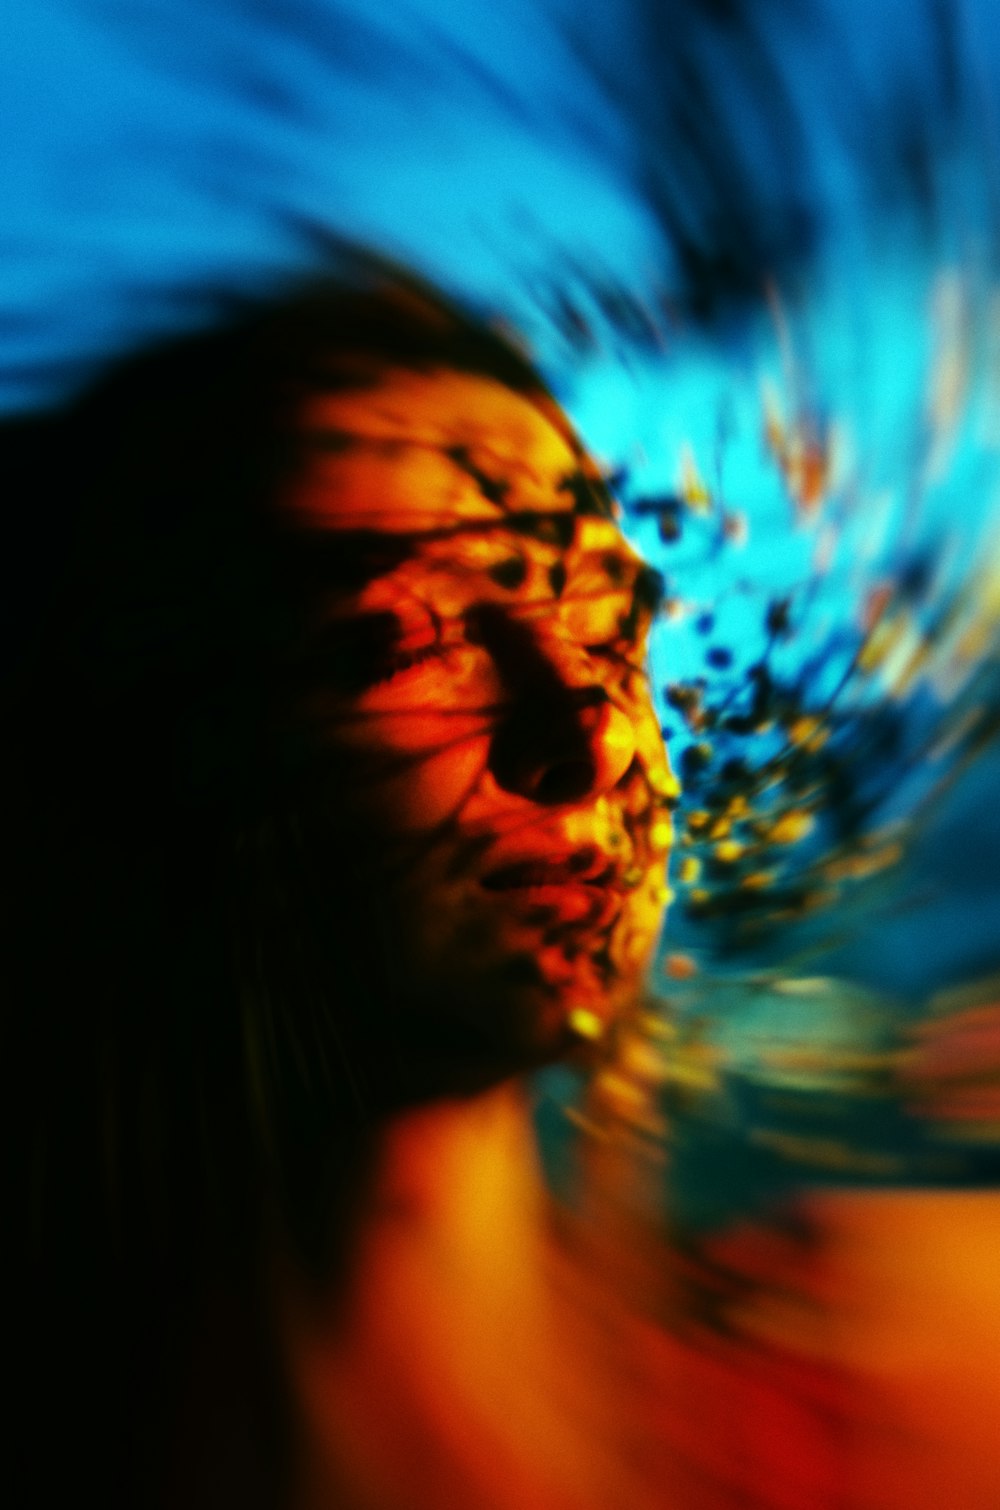 a blurry image of a woman's face and hair